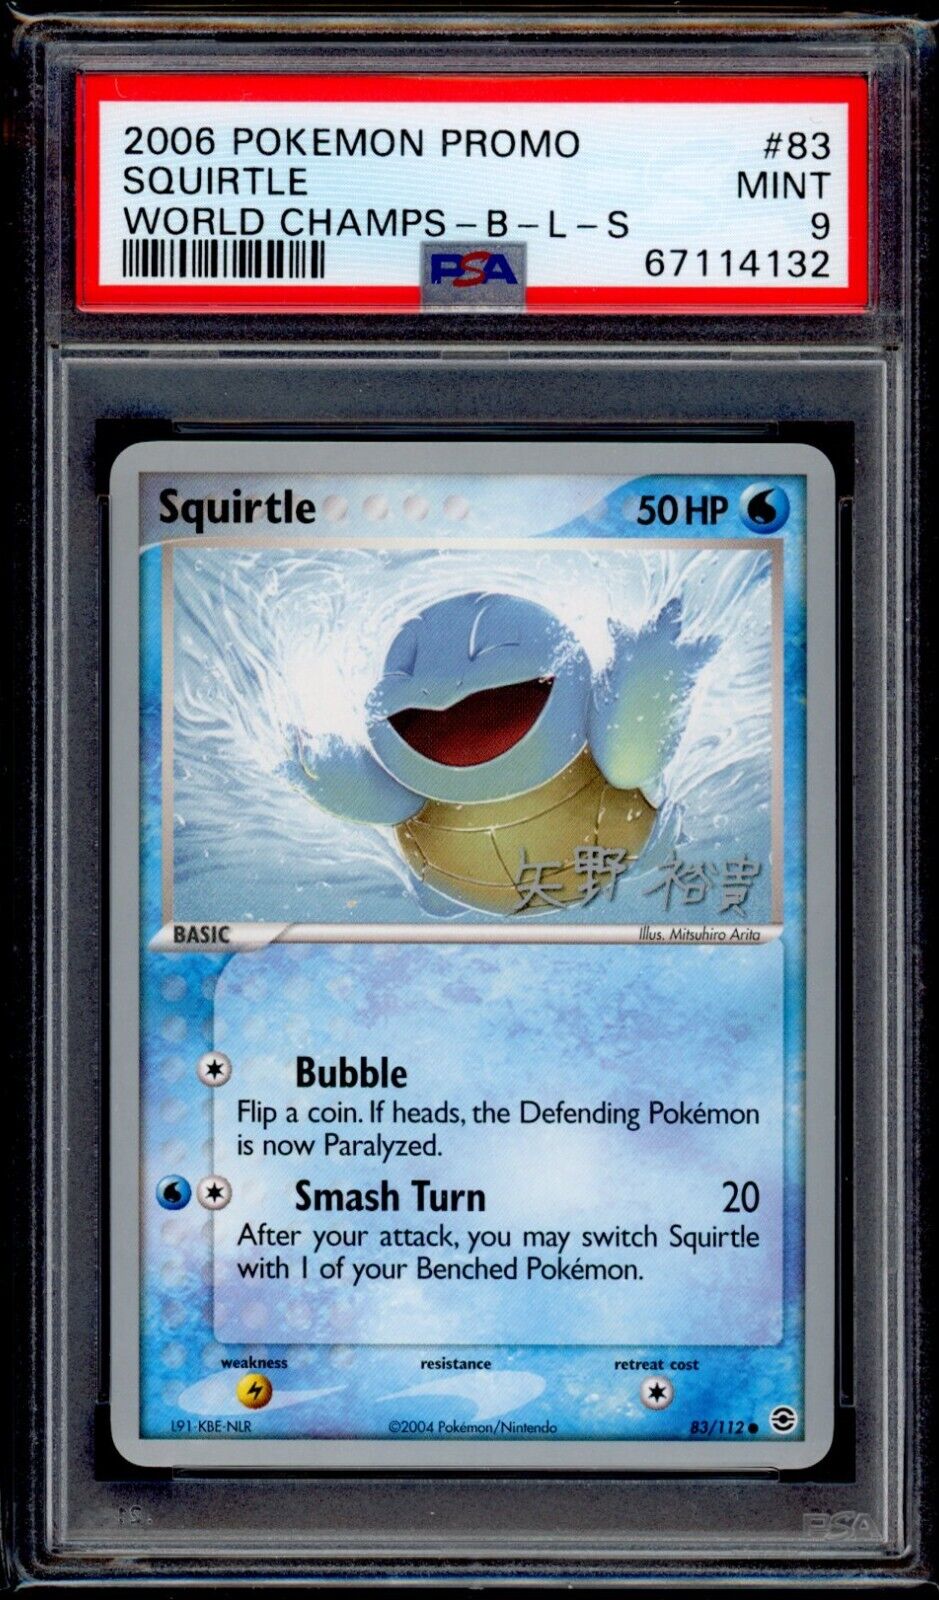 PSA 9 Squirtle 2006 Pokemon Card 83/112 World Champs Promo